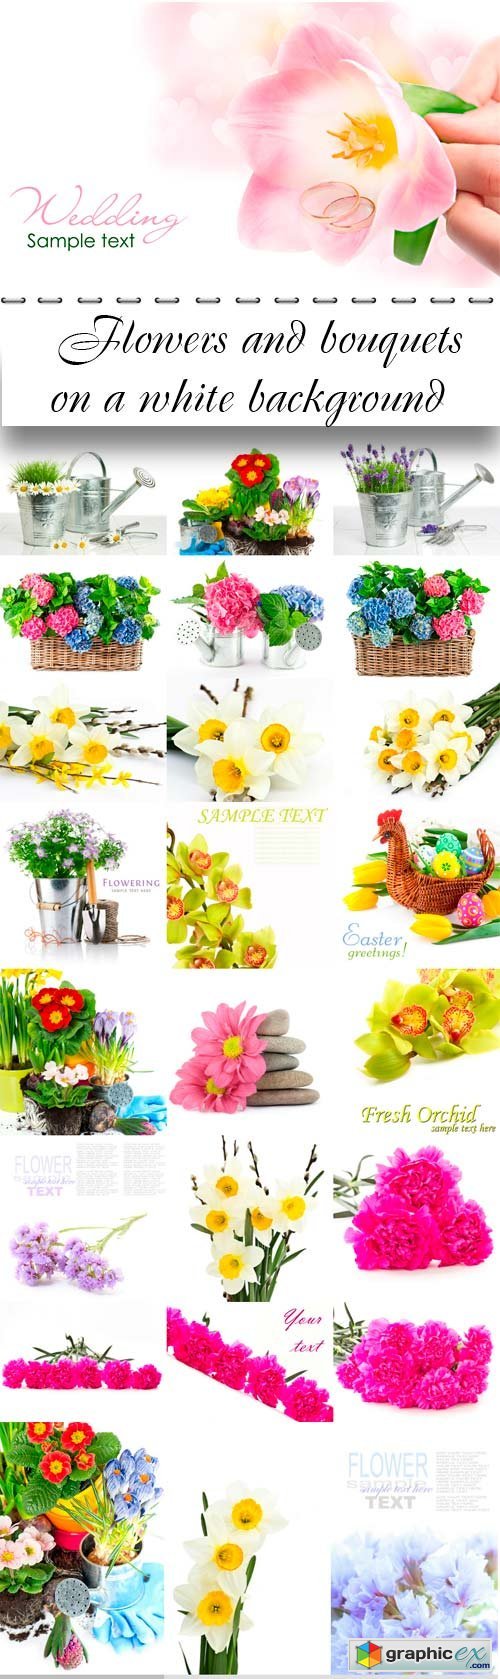 Flowers and bouquets on a white background